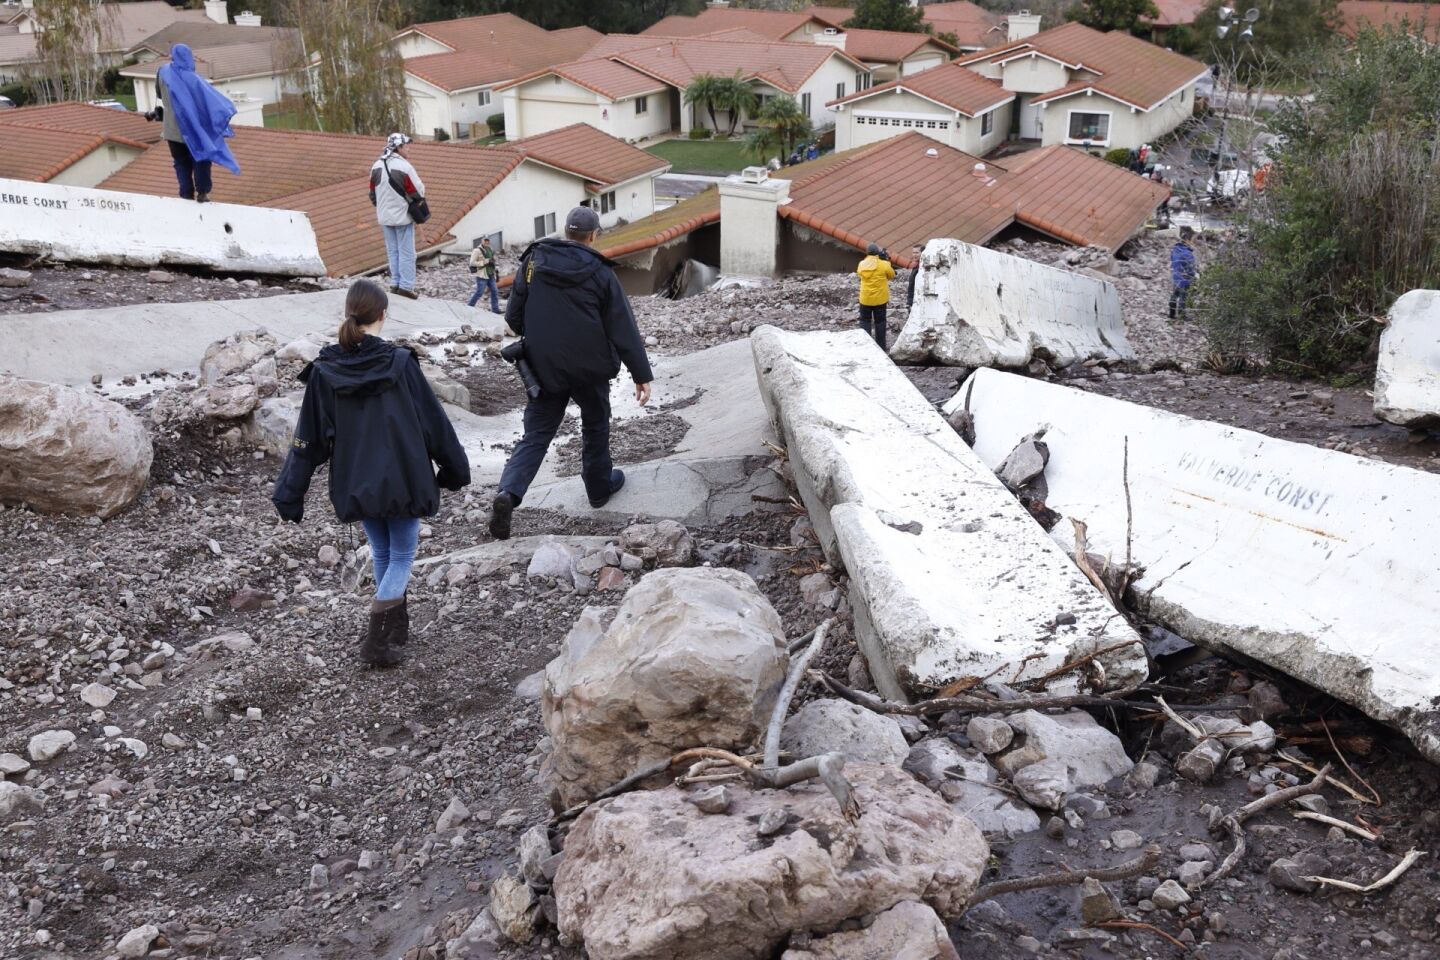 Media look at the debris flow that filled homes and backyards along San Como Lane in Camarillo Springs.